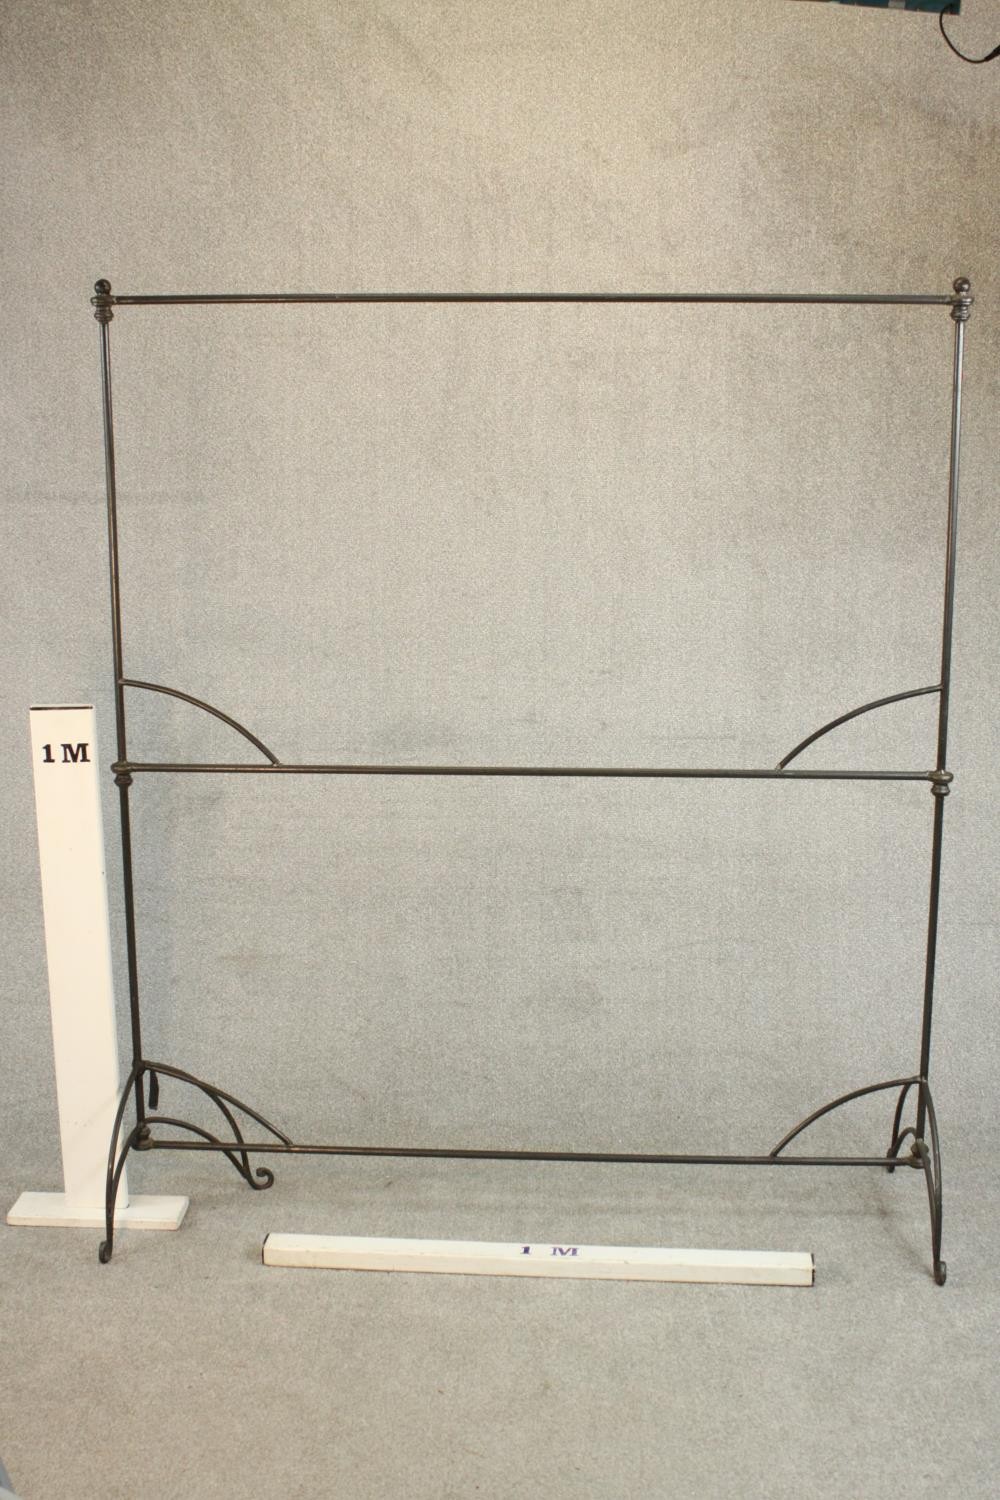 A two tier wrought iron clothes or drying rack. on scrolling legs. (One leg bent) H.176 W.152 D. - Image 2 of 5